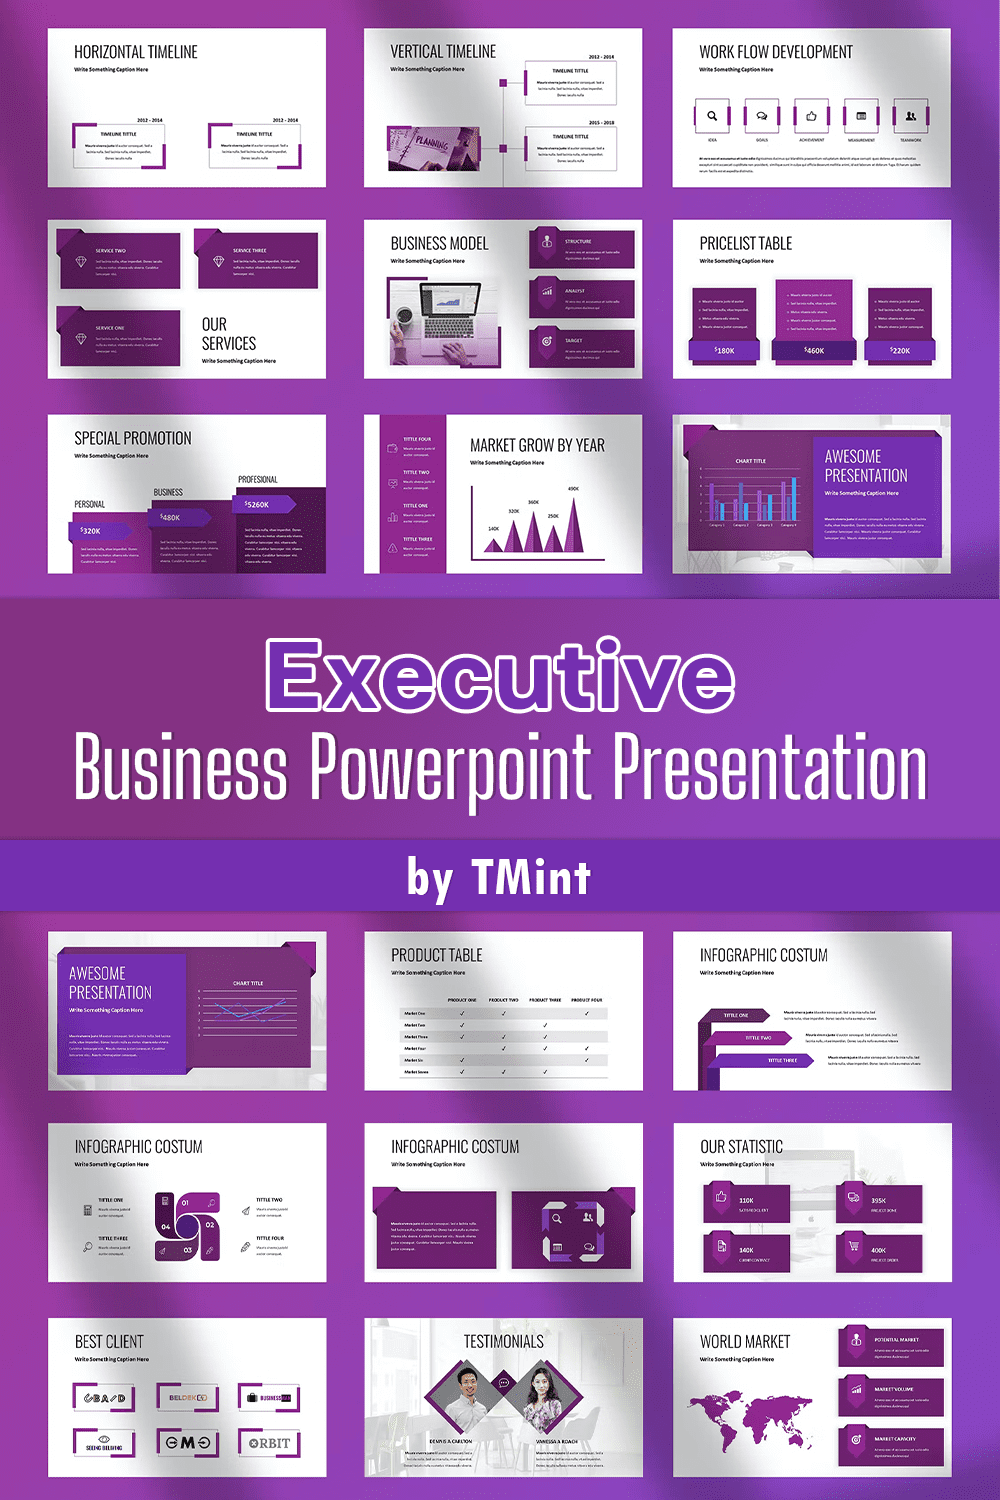 Executive - Powerpoint Presentation For Business - Pinterest.